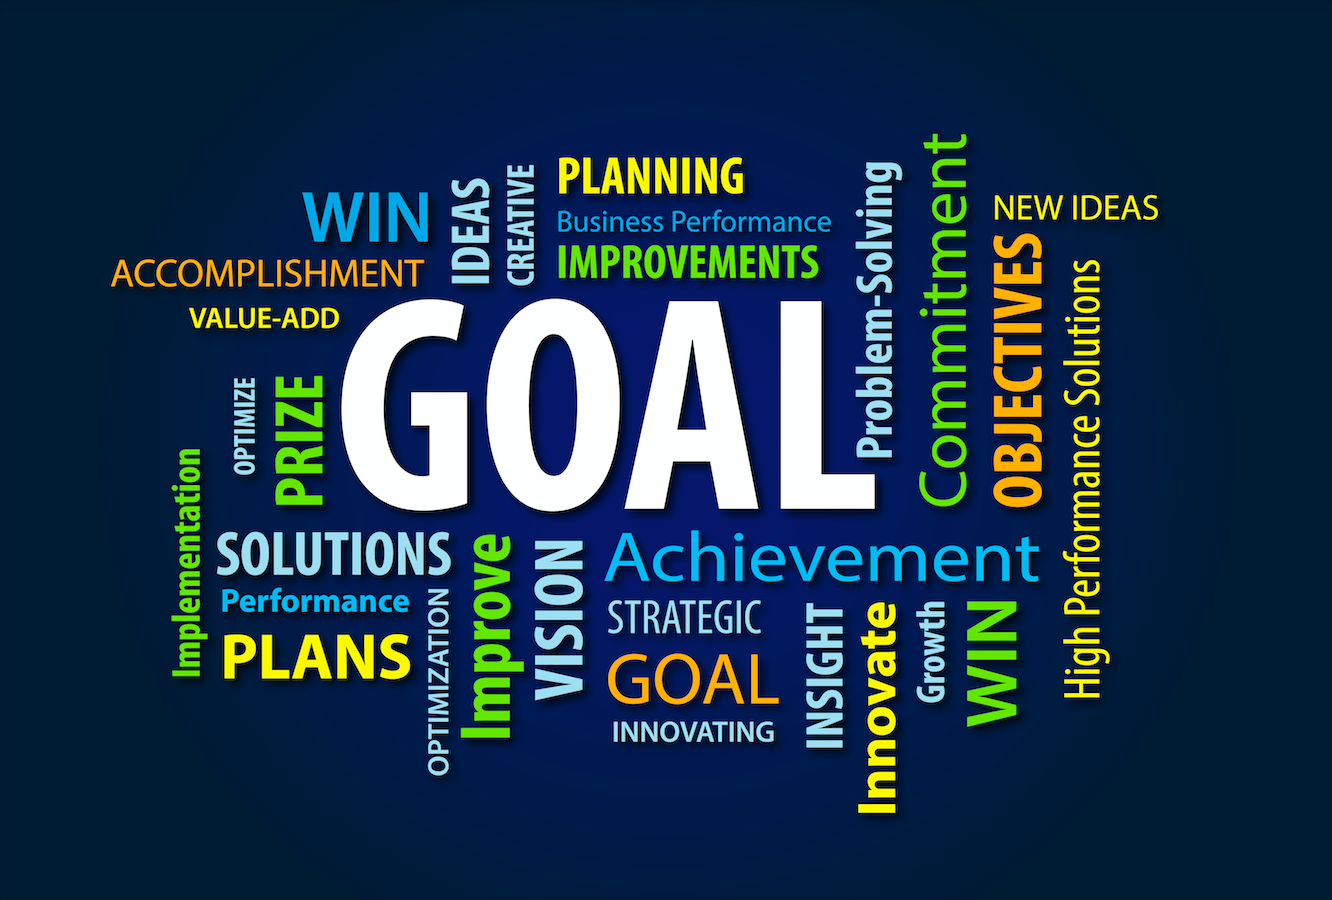  A word cloud image with the central word 'Goal' surrounded by related words such as 'planning', 'business performance', 'improvements', 'hands-on experience', 'training program', 'attributes', 'career goals', 'training providers', and 'cloud service training'.